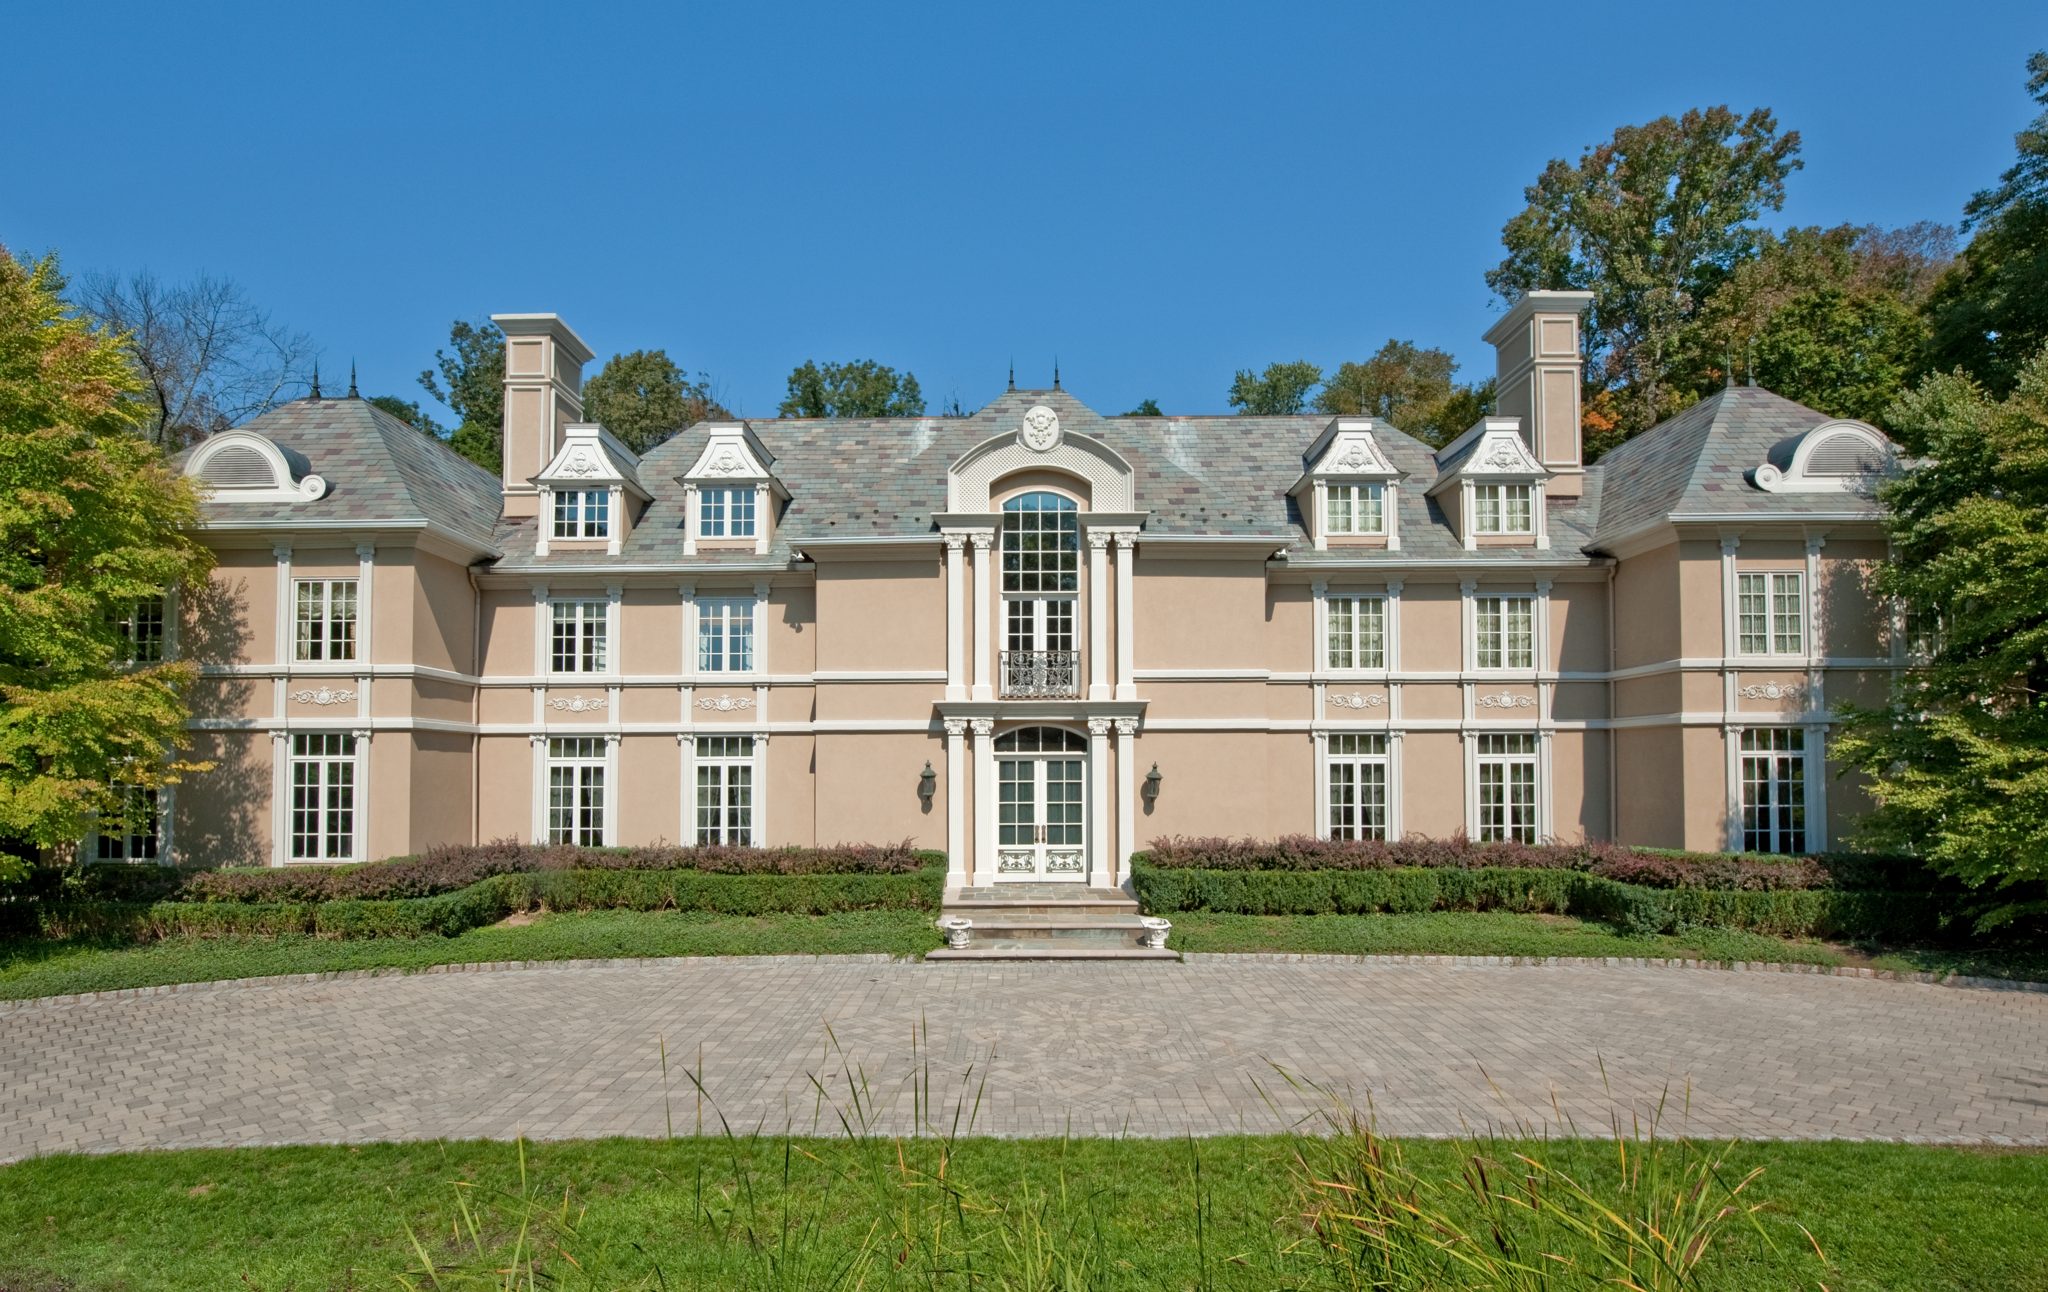 2014 Designer Showhouse of New Jersey